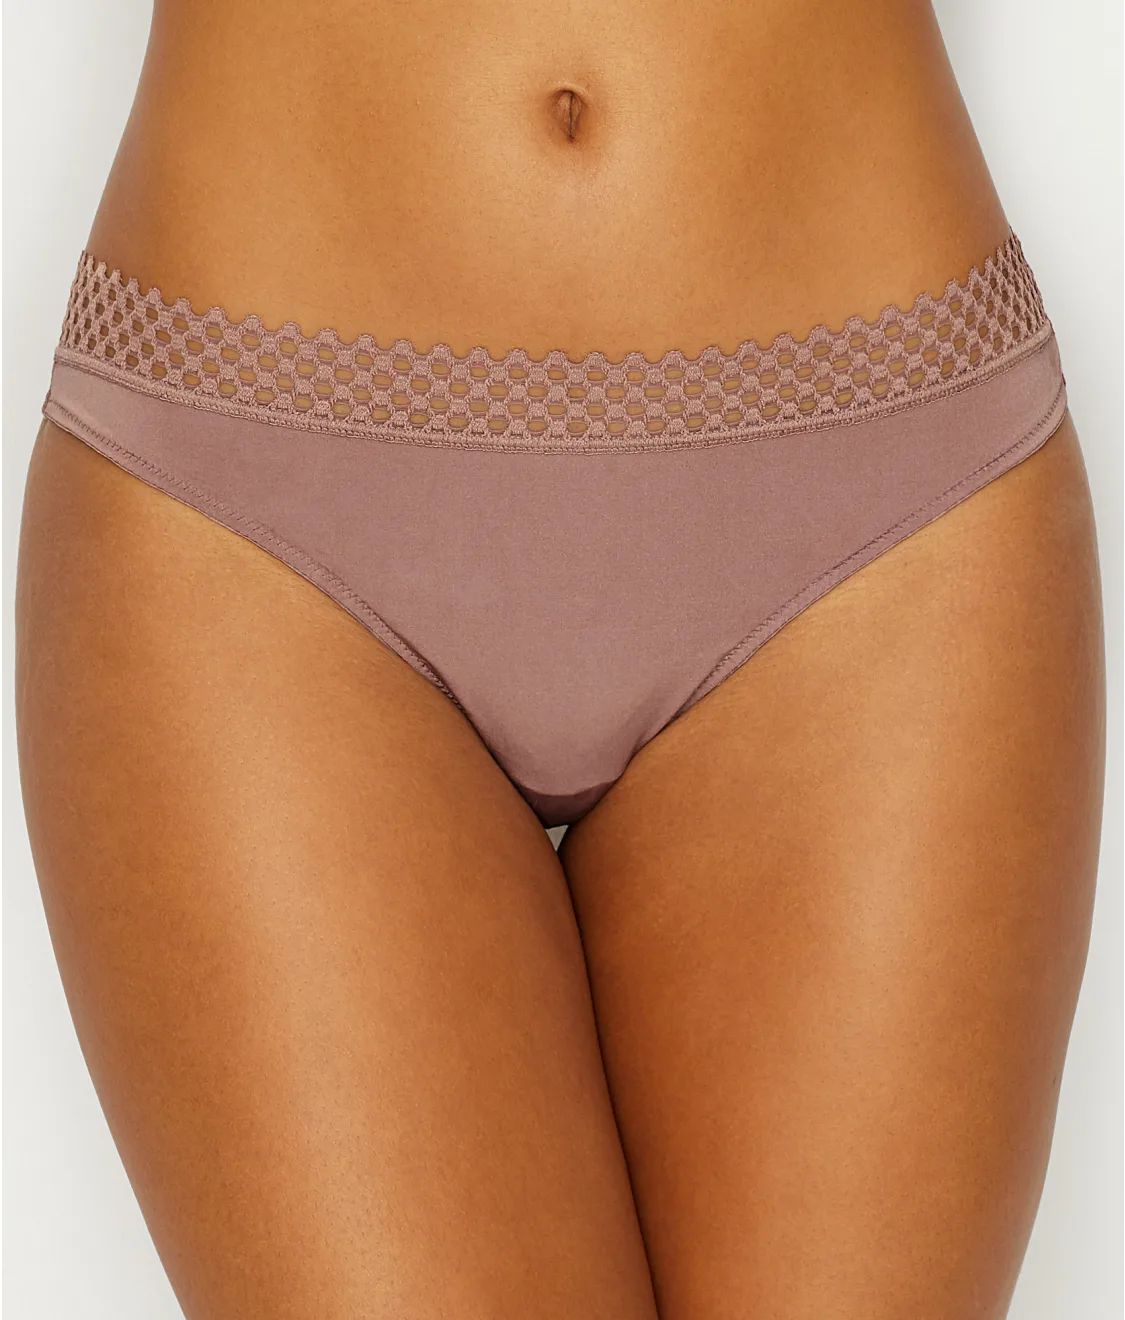 Tied In Dots Lace Top Thong Panty